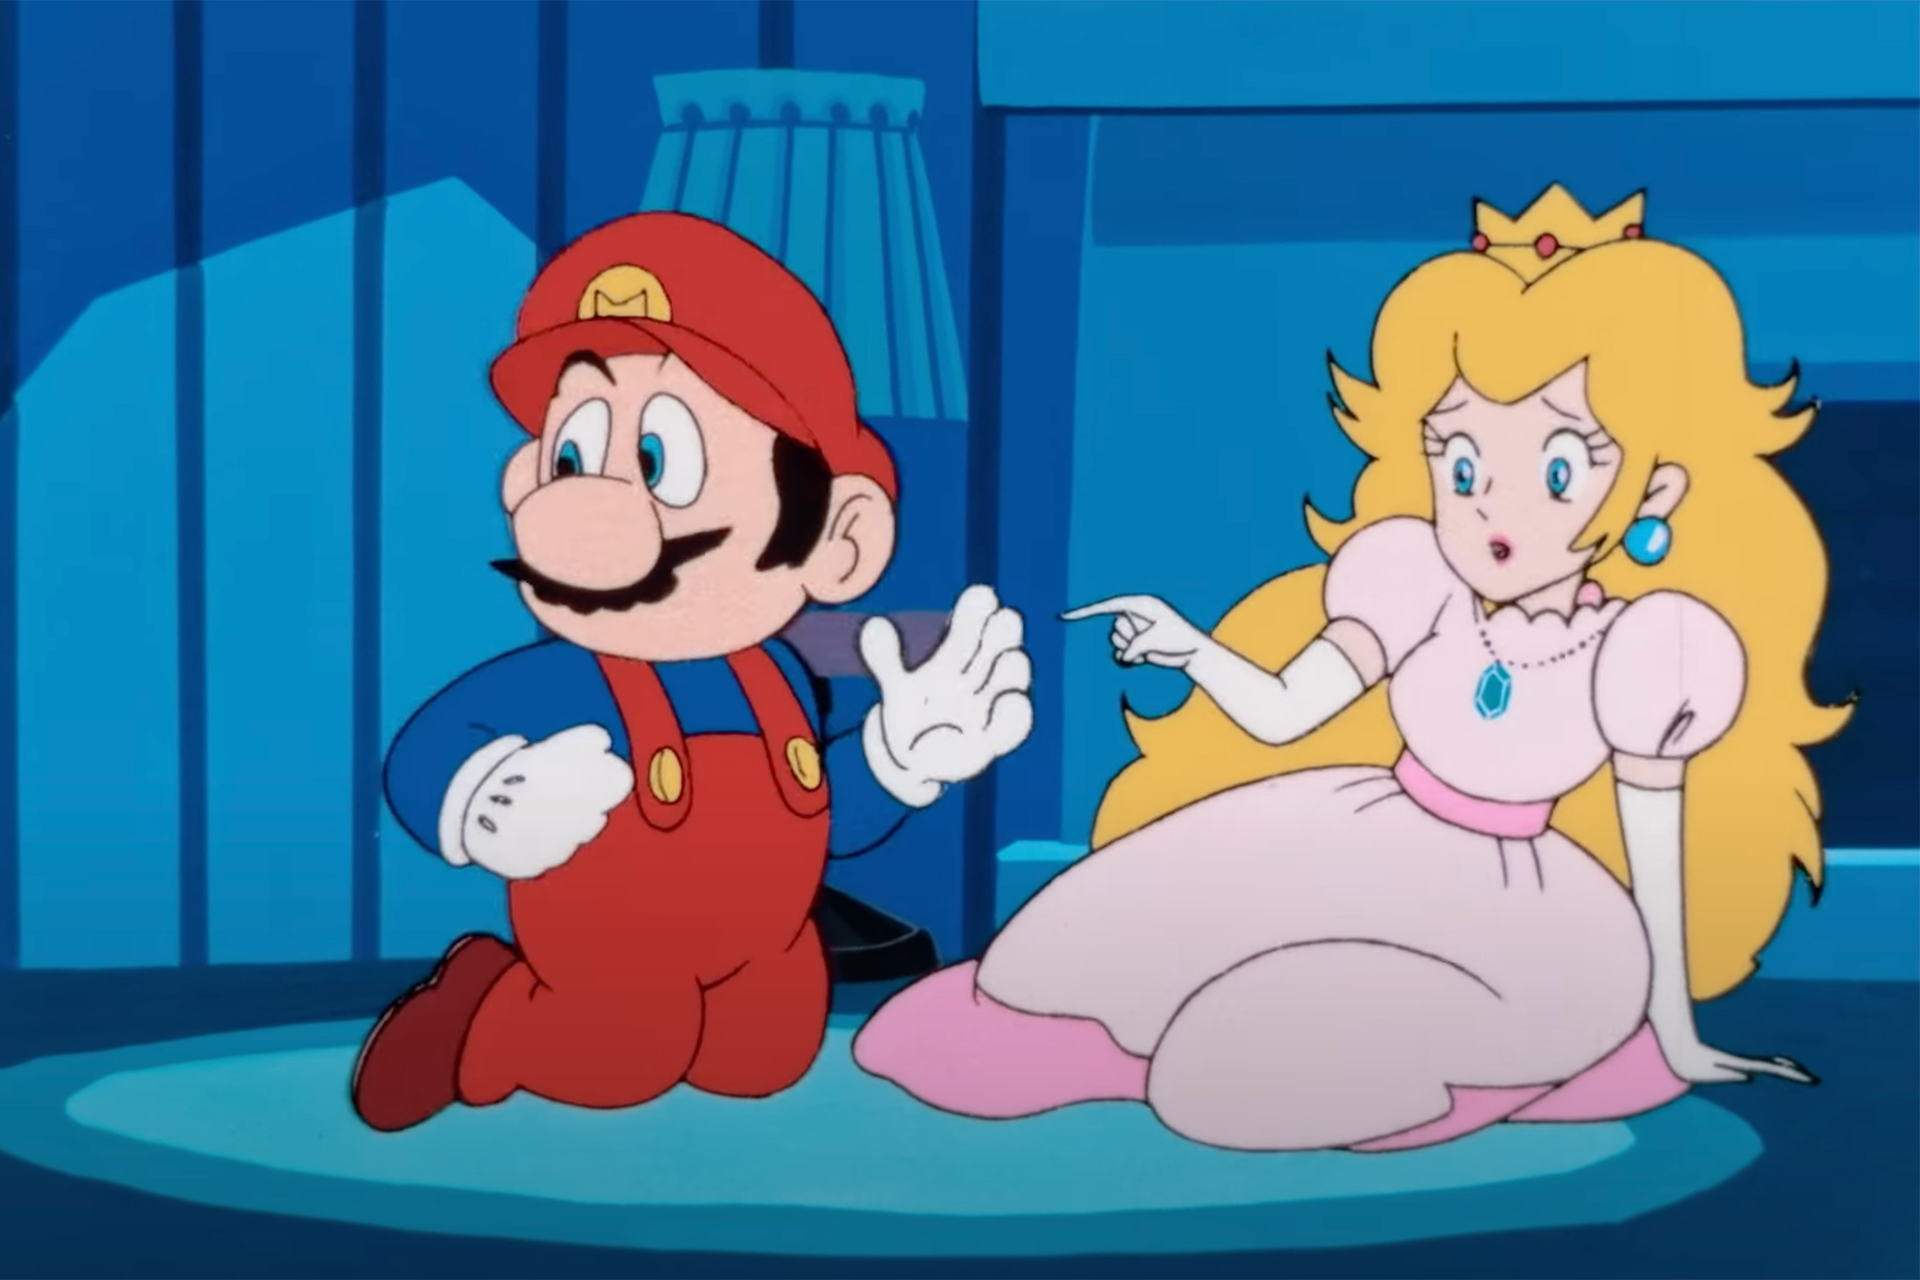 Nintendo’s Super Mario anime has been remastered in 4K to confuse a new generati..